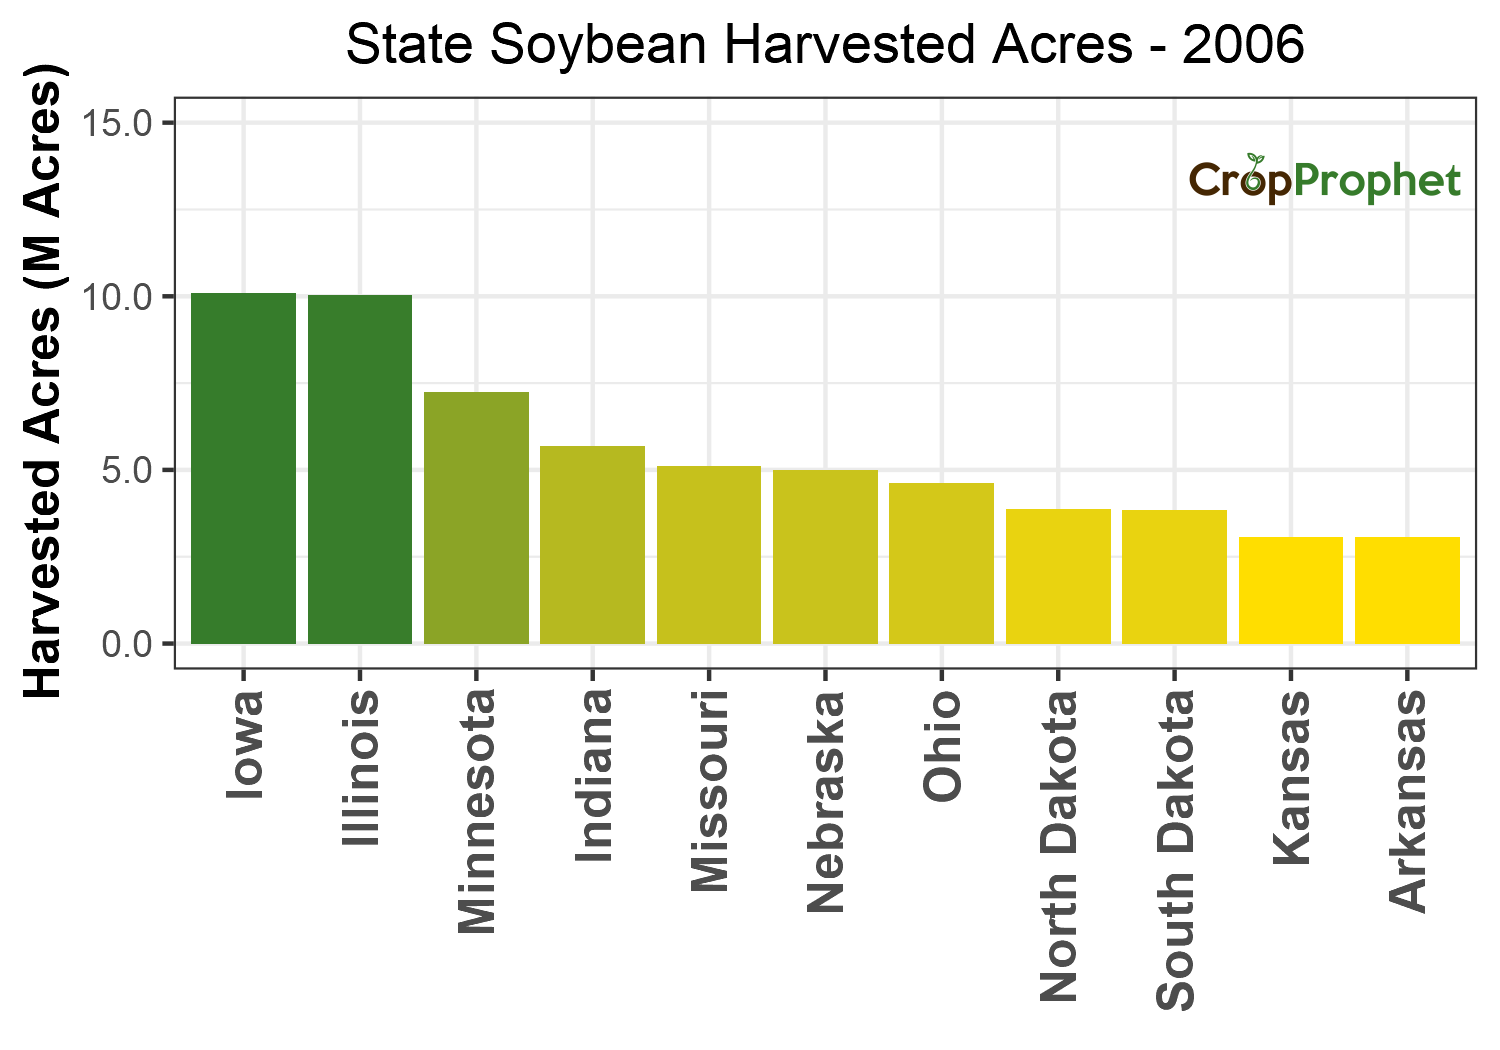 Soybean Harvested Acres by State - 2006 Rankings